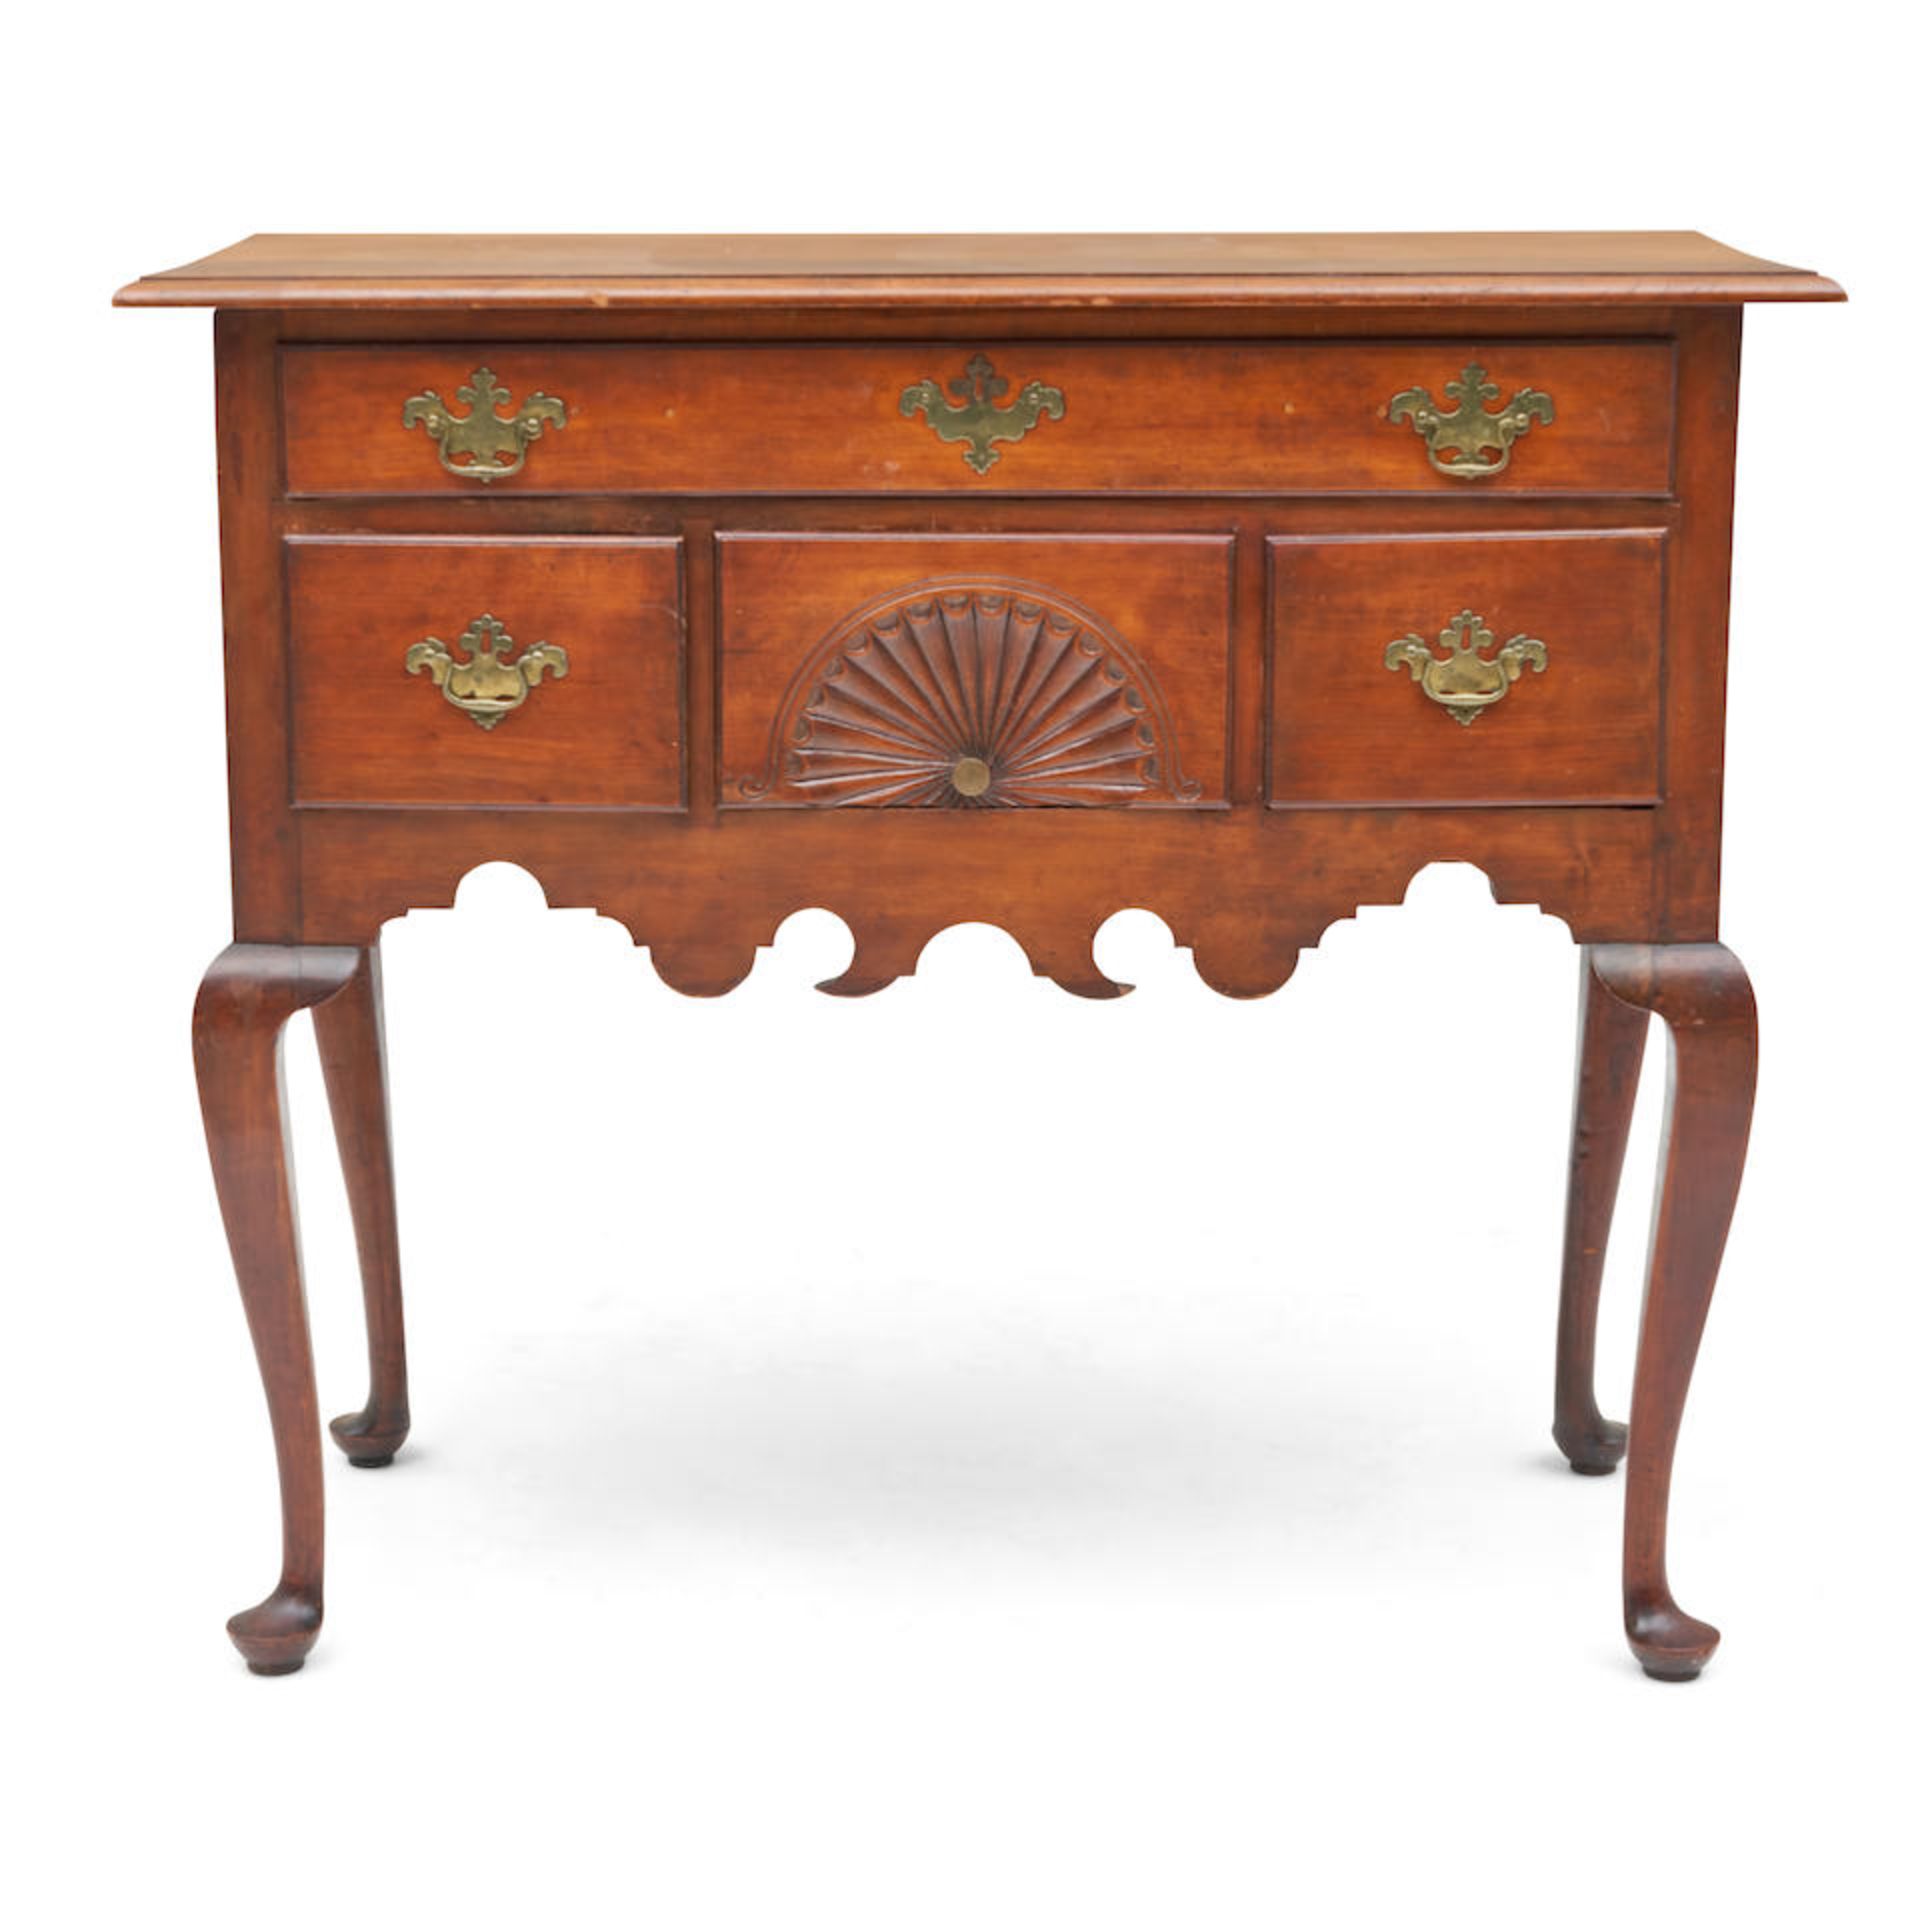 CHIPPENDALE-STYLE MAHOGANY BASE OF A HIGH CHEST